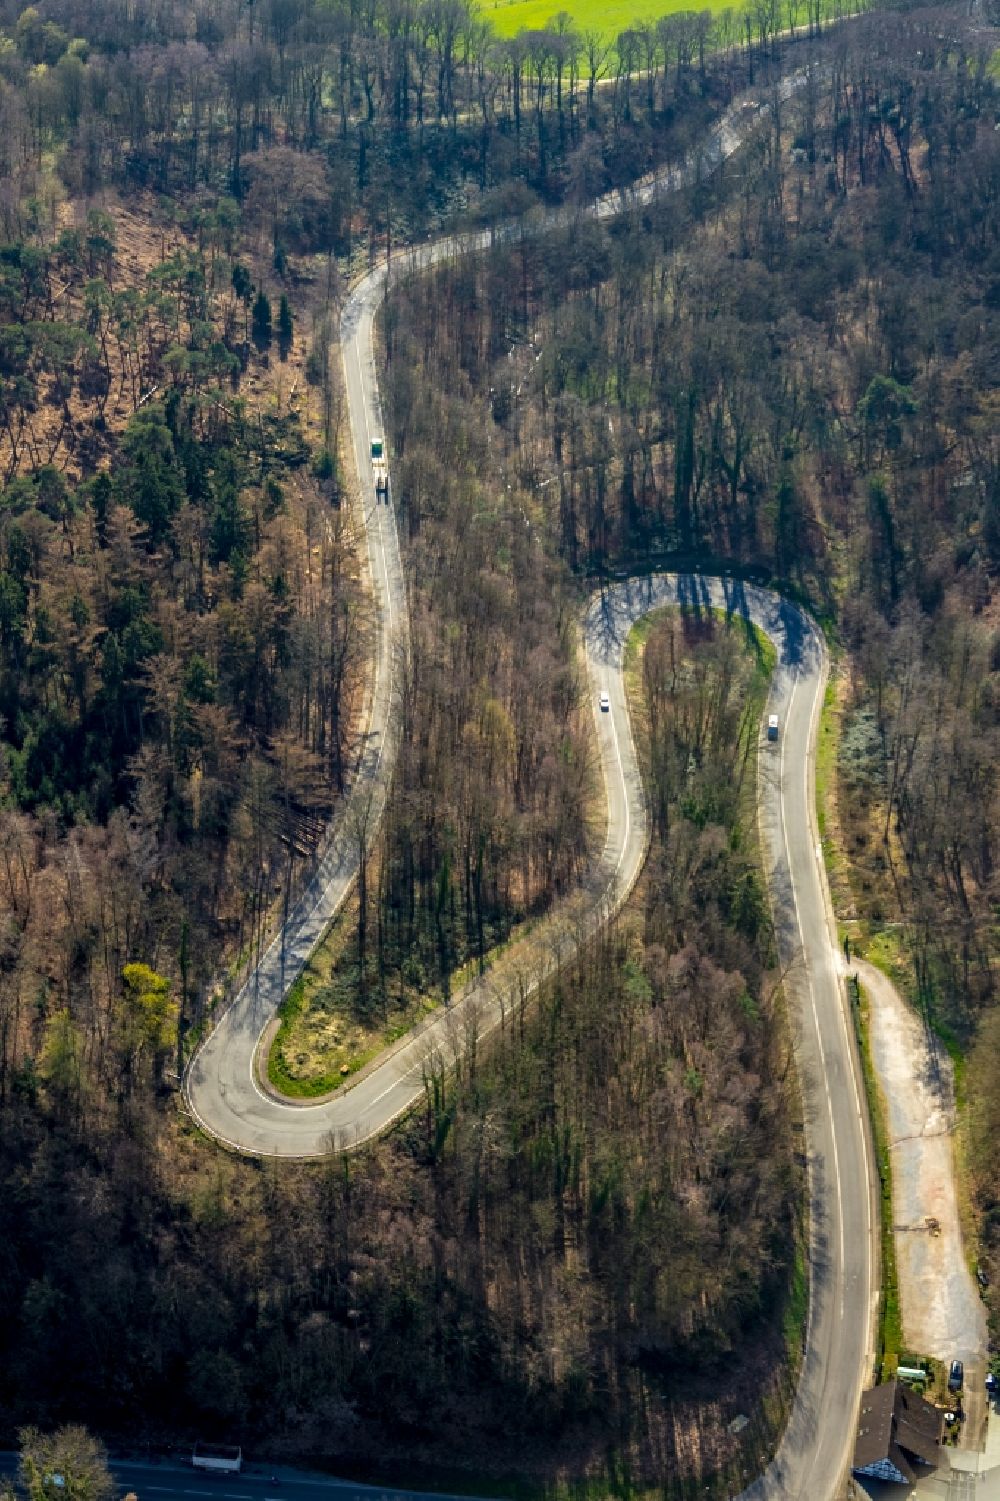 Ratingen from the bird's eye view: Serpentine-shaped curve of a road guide of Essener Strasse in Ratingen in the state North Rhine-Westphalia, Germany